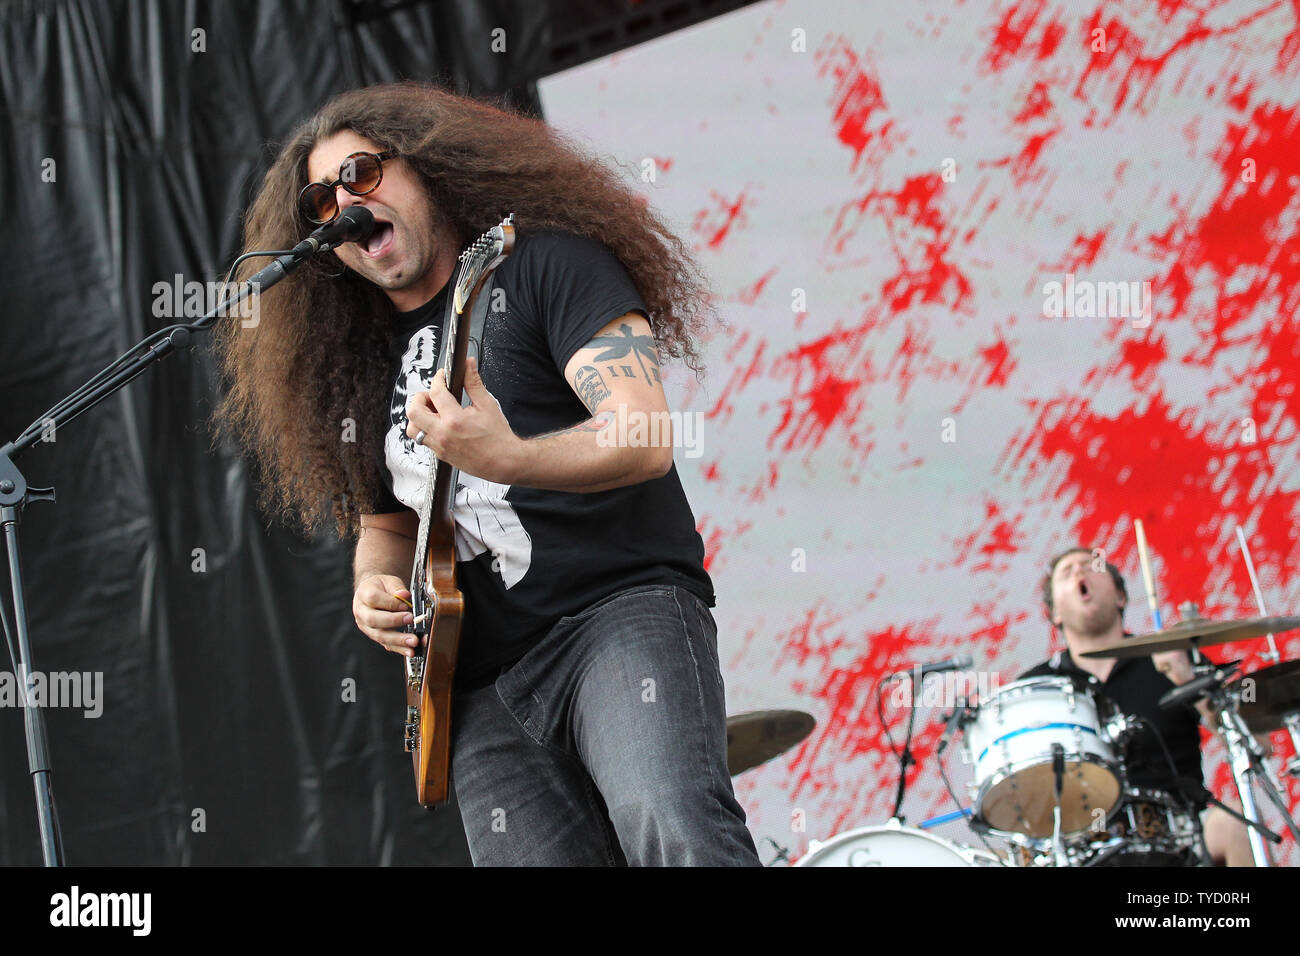 American rock band Coheed and Cambria performs during the 30th bi-annual Rock in Rio music festival at the MGM Grand in Las Vegas, Nevada on May 9, 2015.   Photo by James Atoa/UPI Stock Photo